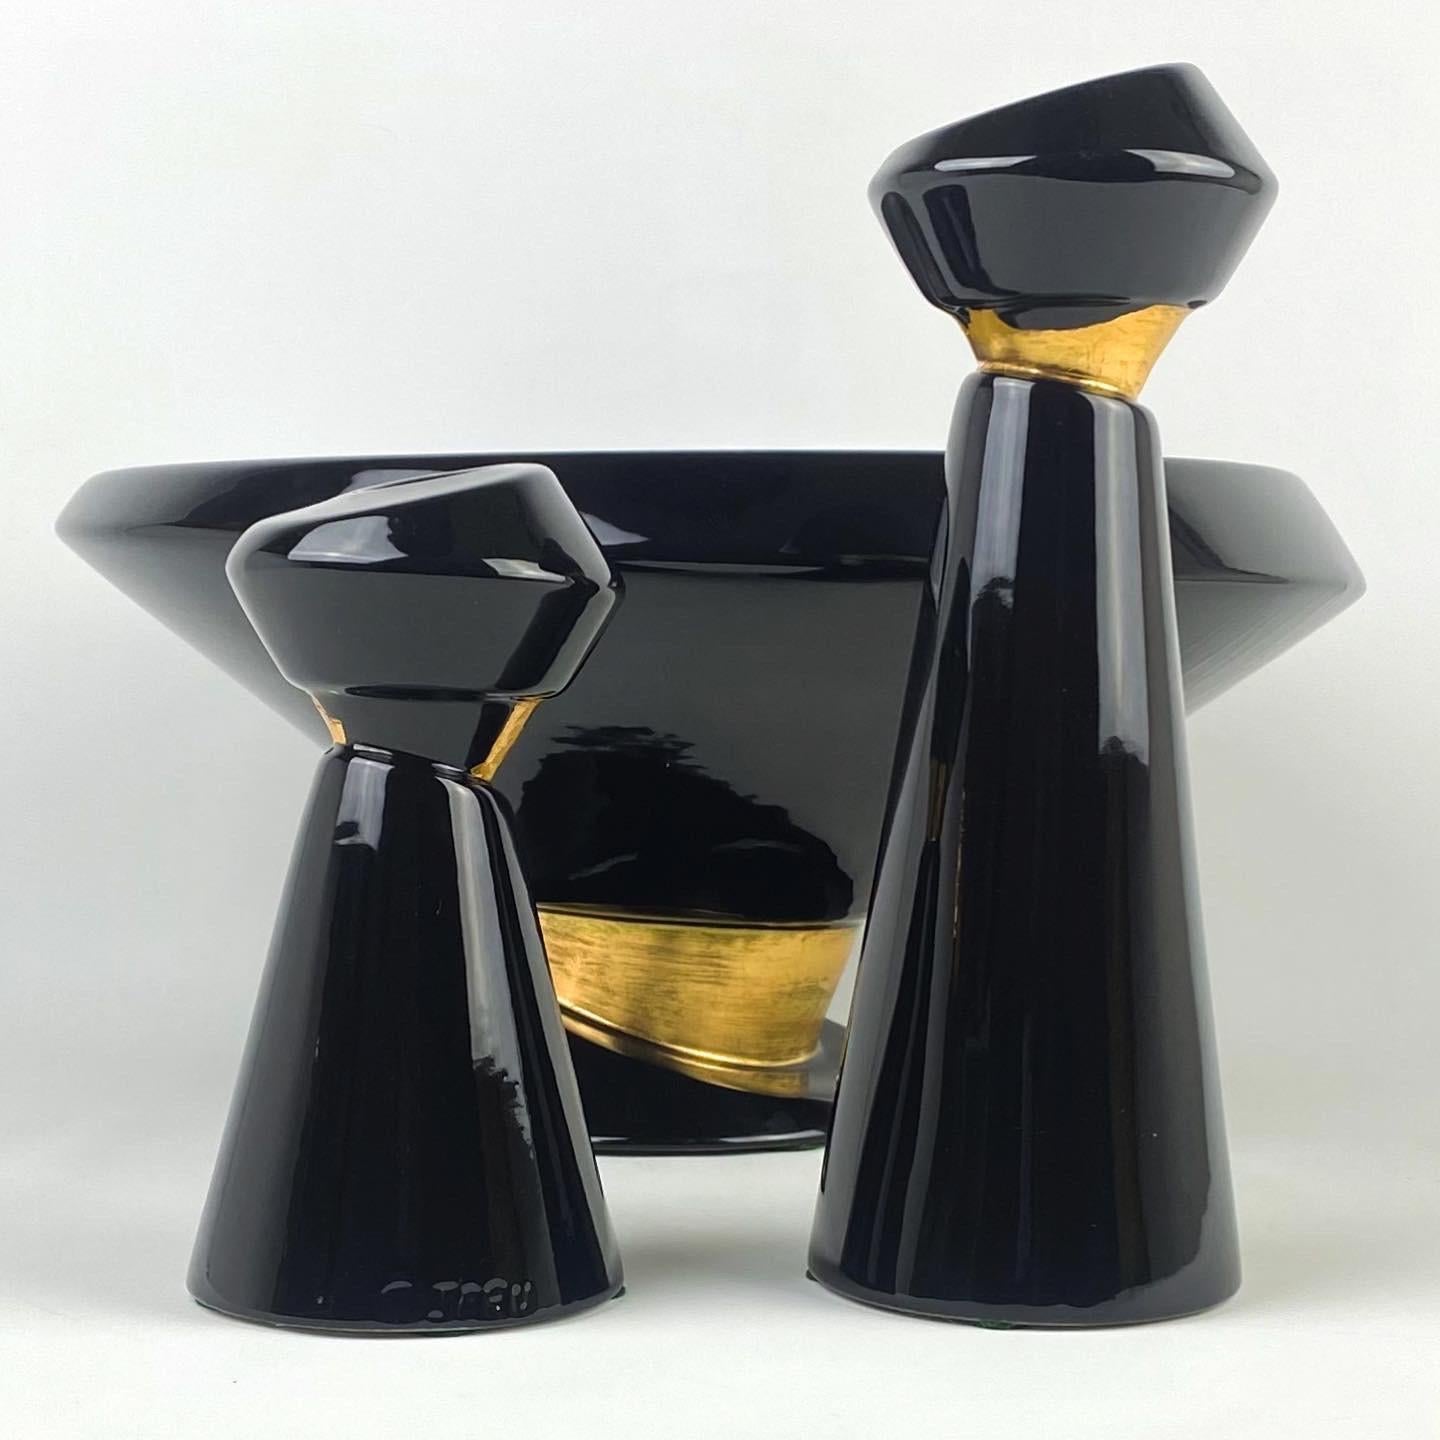 Vintage 80s Jaru Asymmetrical ceramic bowl and candle holder set. Jet black ceramic glazed with gold leaf accents. Made in California by Jaru Art Products
Rare set of 3 pieces.

Tall candle holder: 3.75” D x 3.75” W x 10.5” H
Short candle holder: